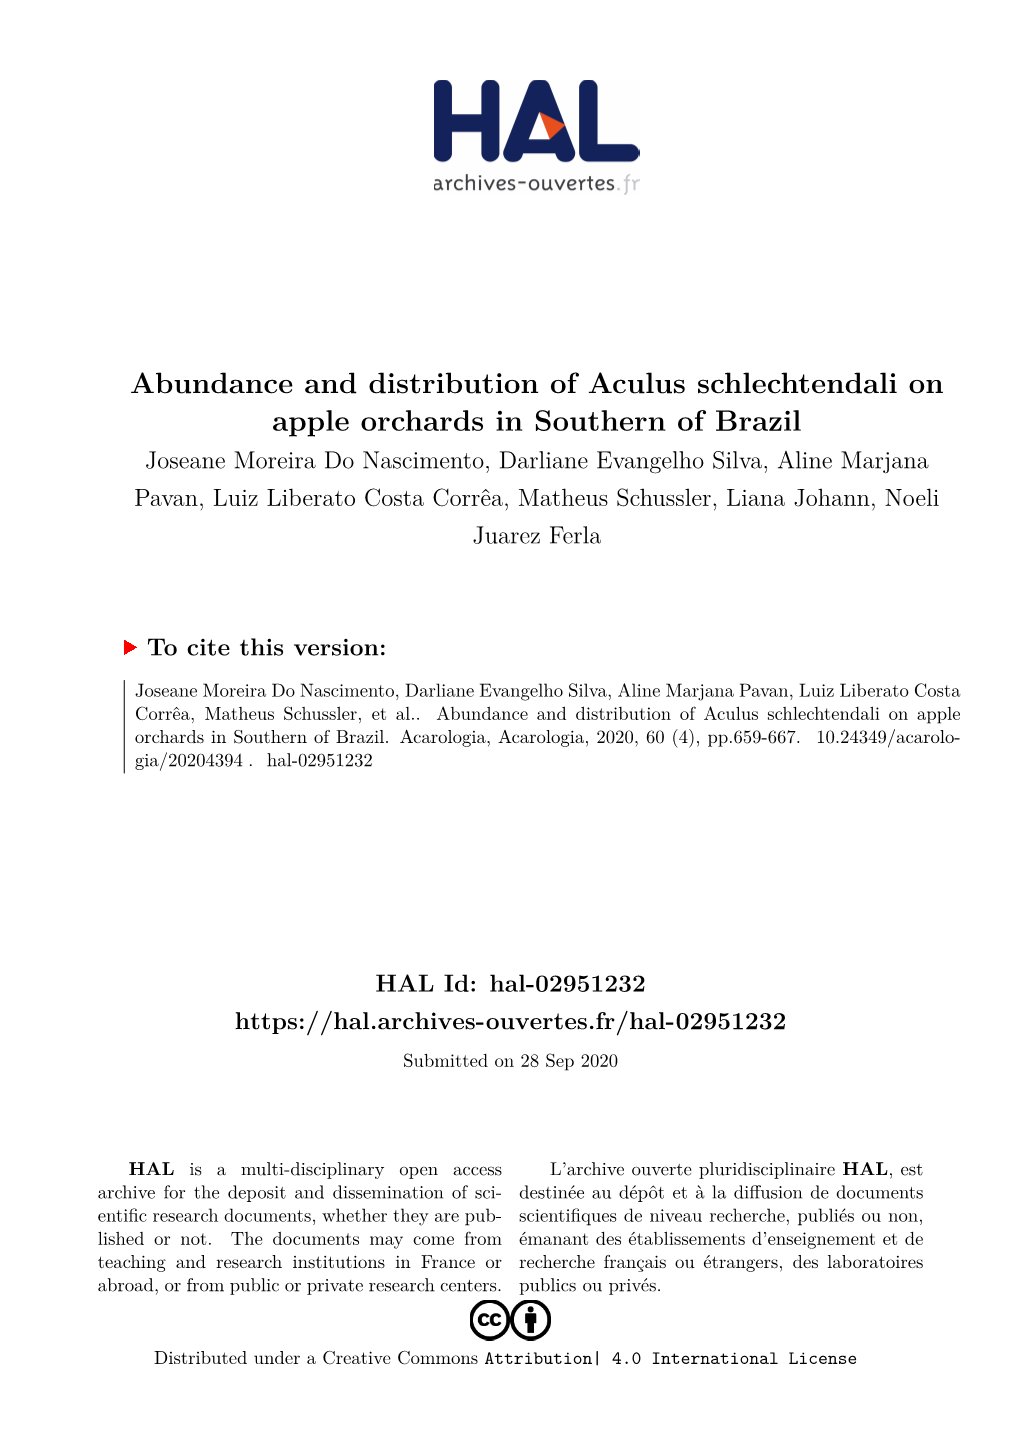 Abundance and Distribution of Aculus Schlechtendali on Apple Orchards In